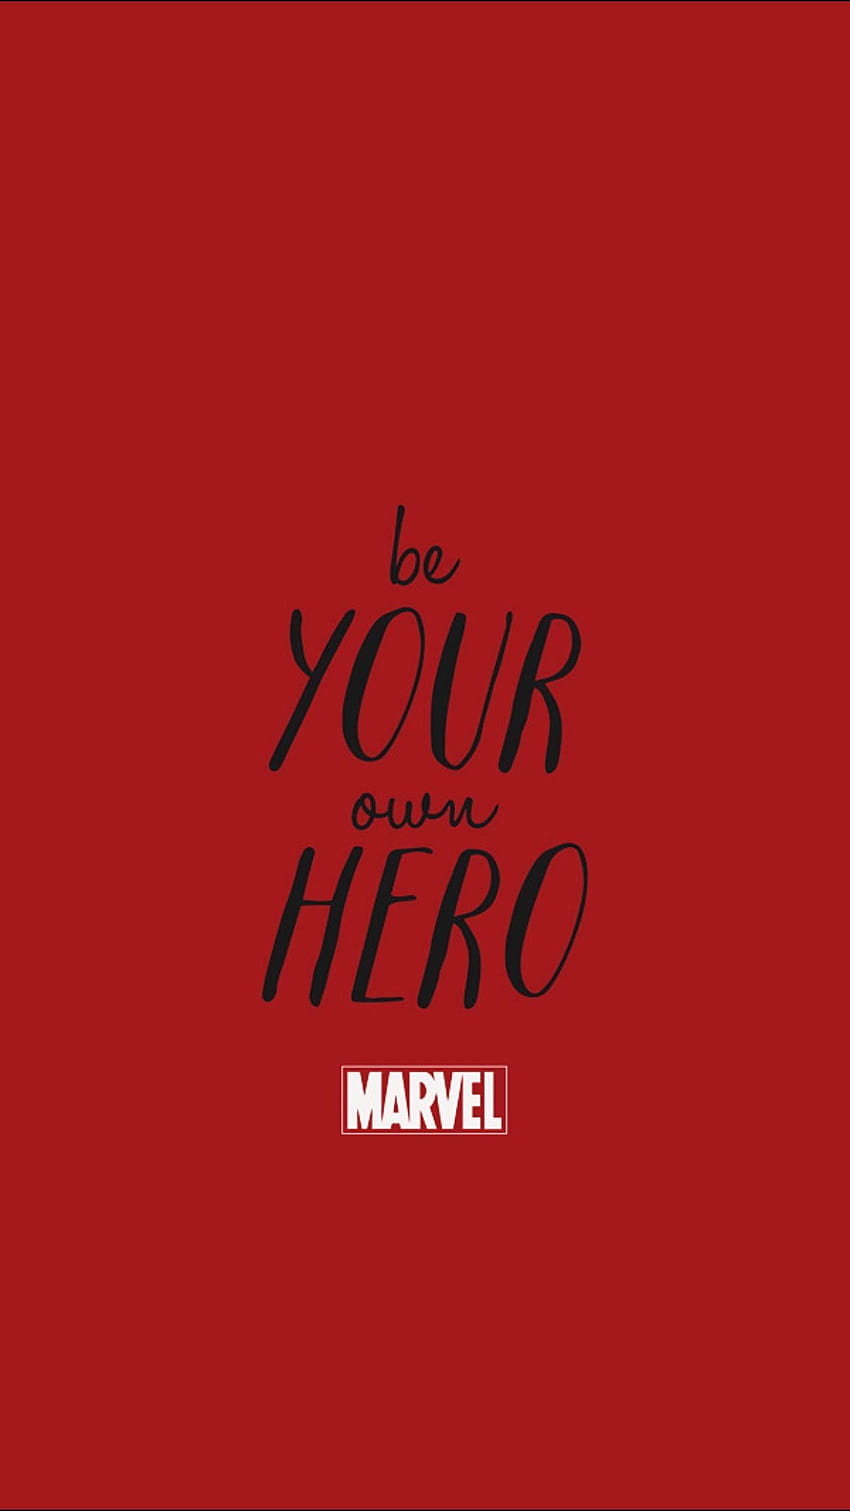 Marvel Movie for iPhone from Uploaded by user. Papel de parede vingadores, Papel de parede marvel, Marvel universe, Marvel Quote HD phone wallpaper